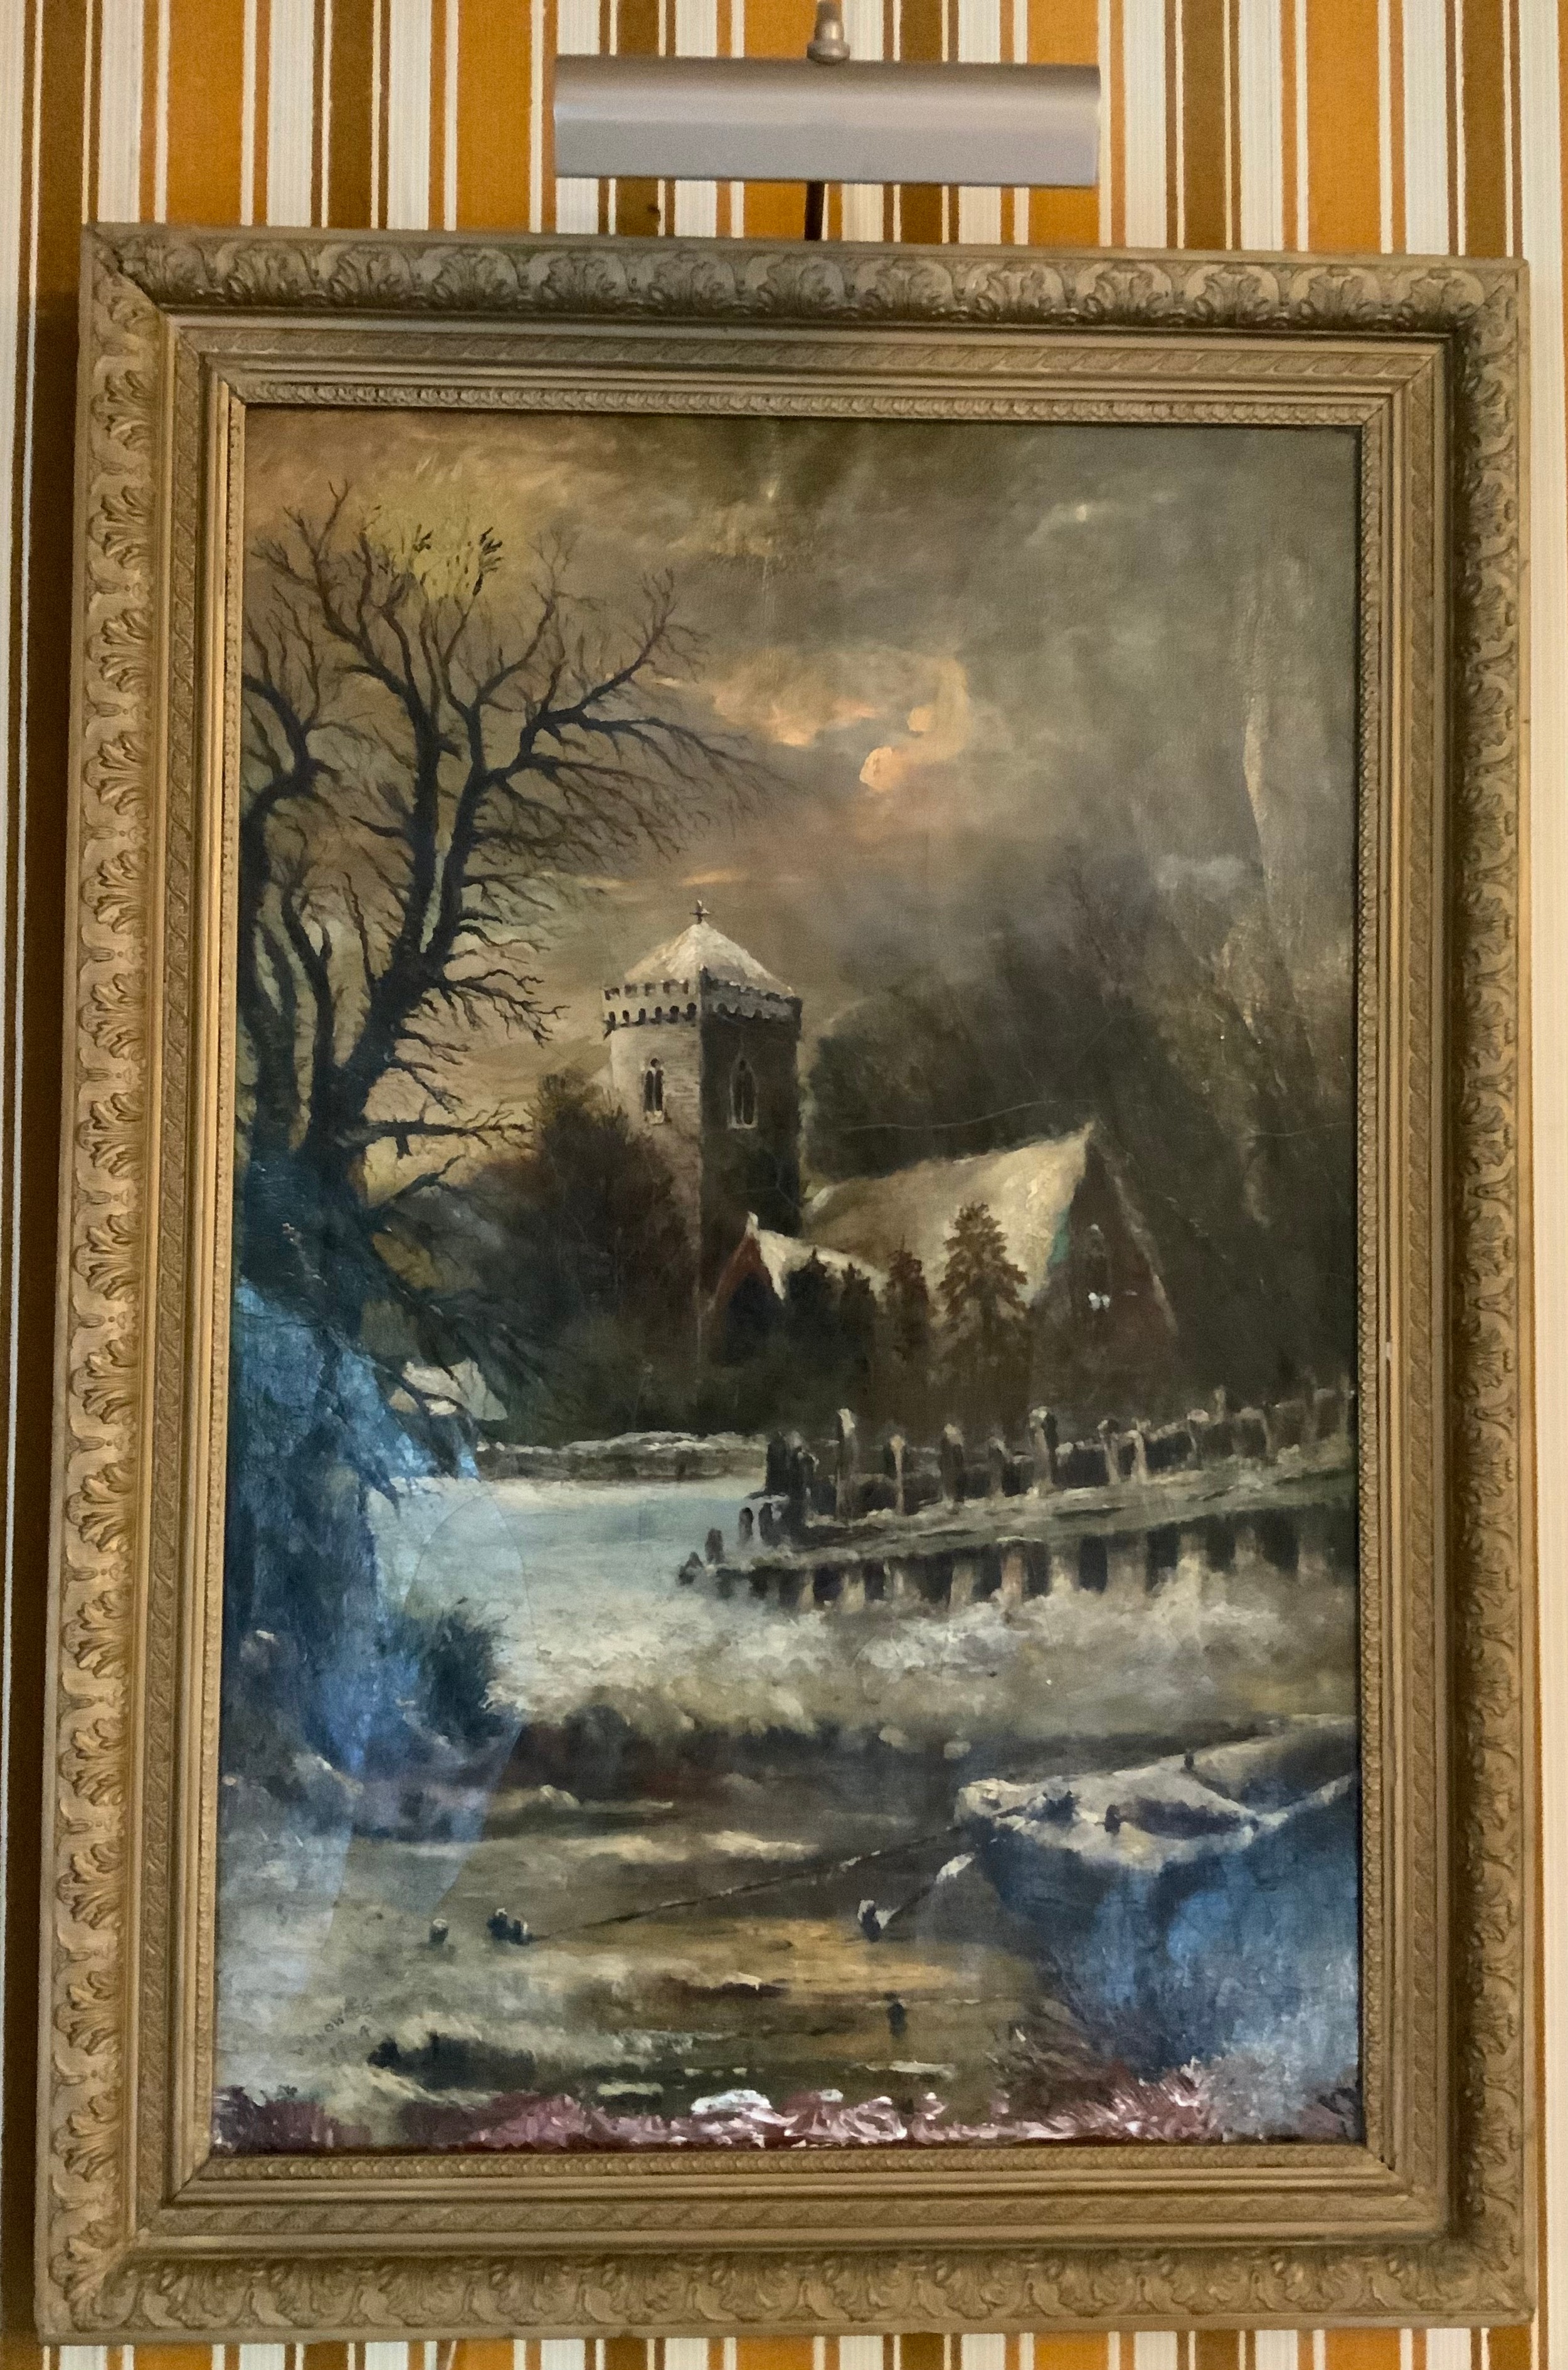 W**Knowles (early 20th century) Village Church on a Snowy Day signed, dated 1904, oil on canvas, - Image 2 of 2